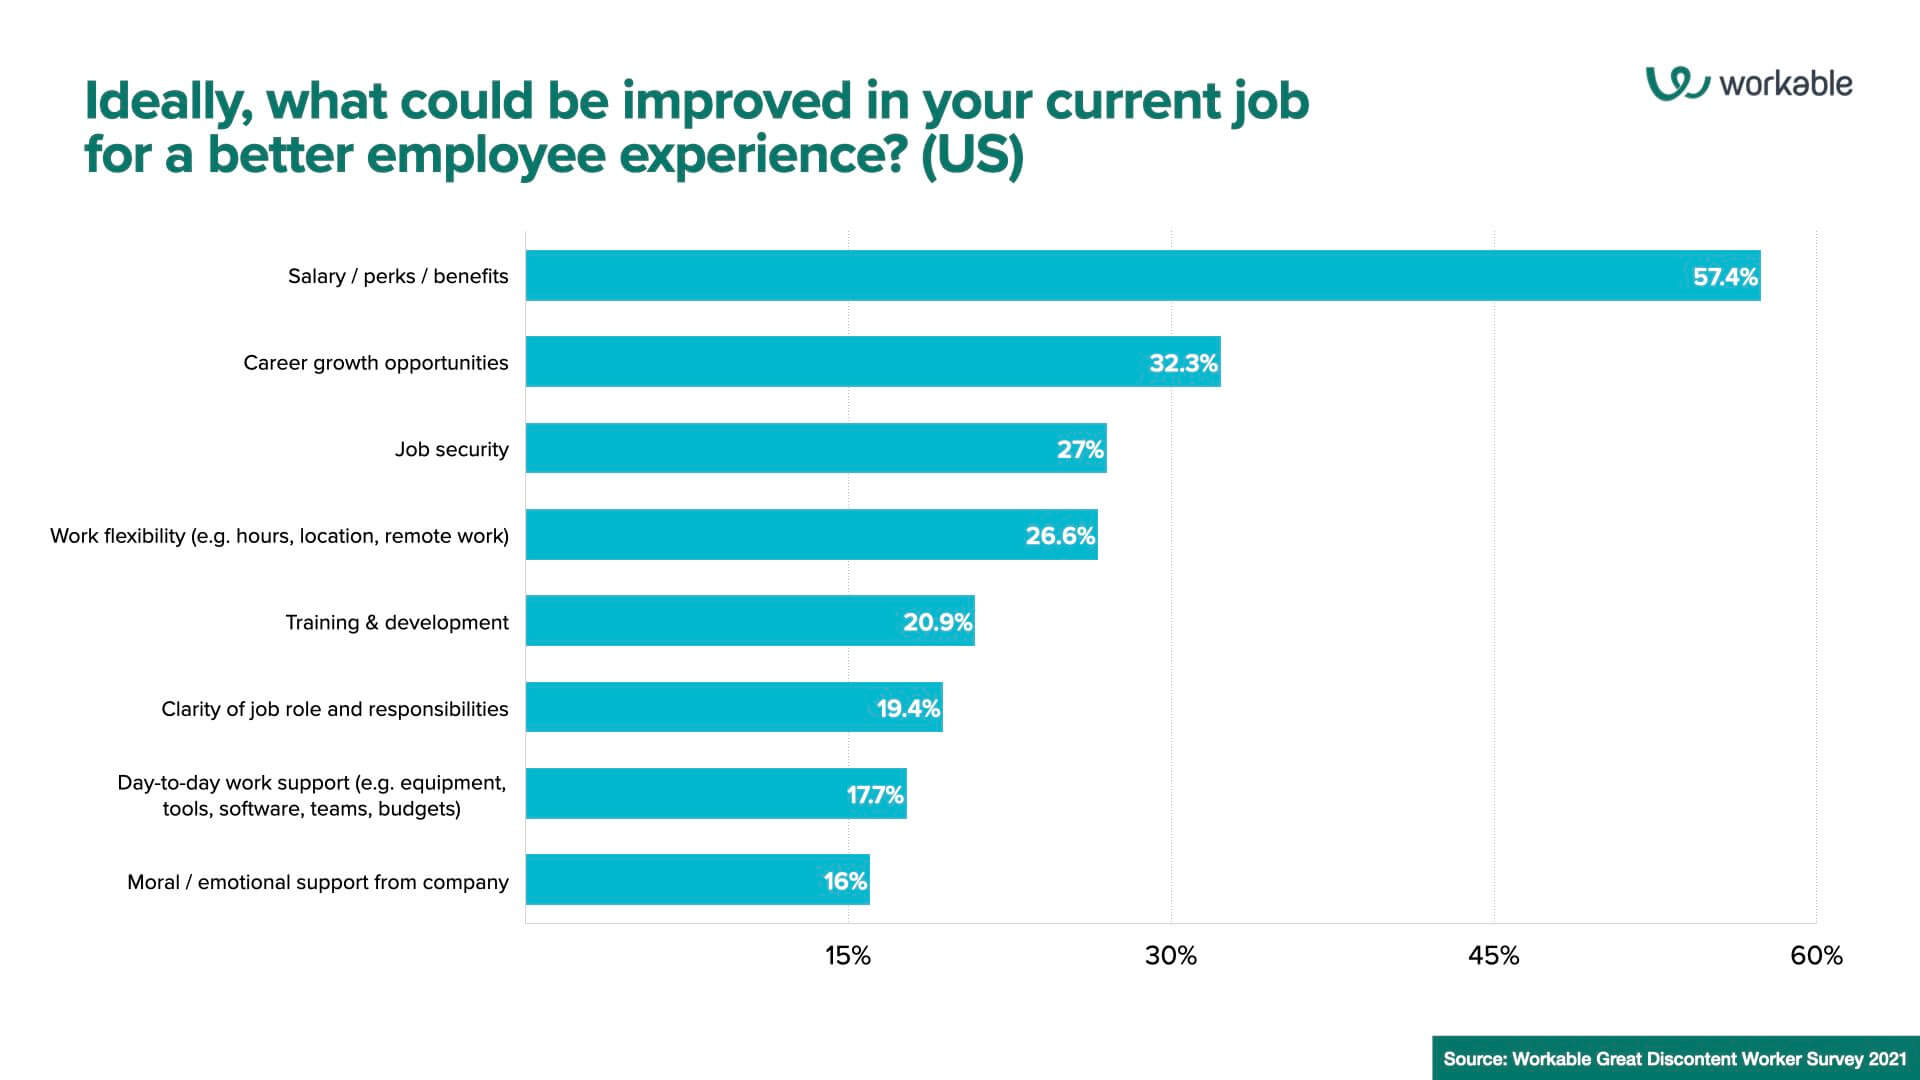 Ideally, what could be improved in your current job for a better employee experience? (US)